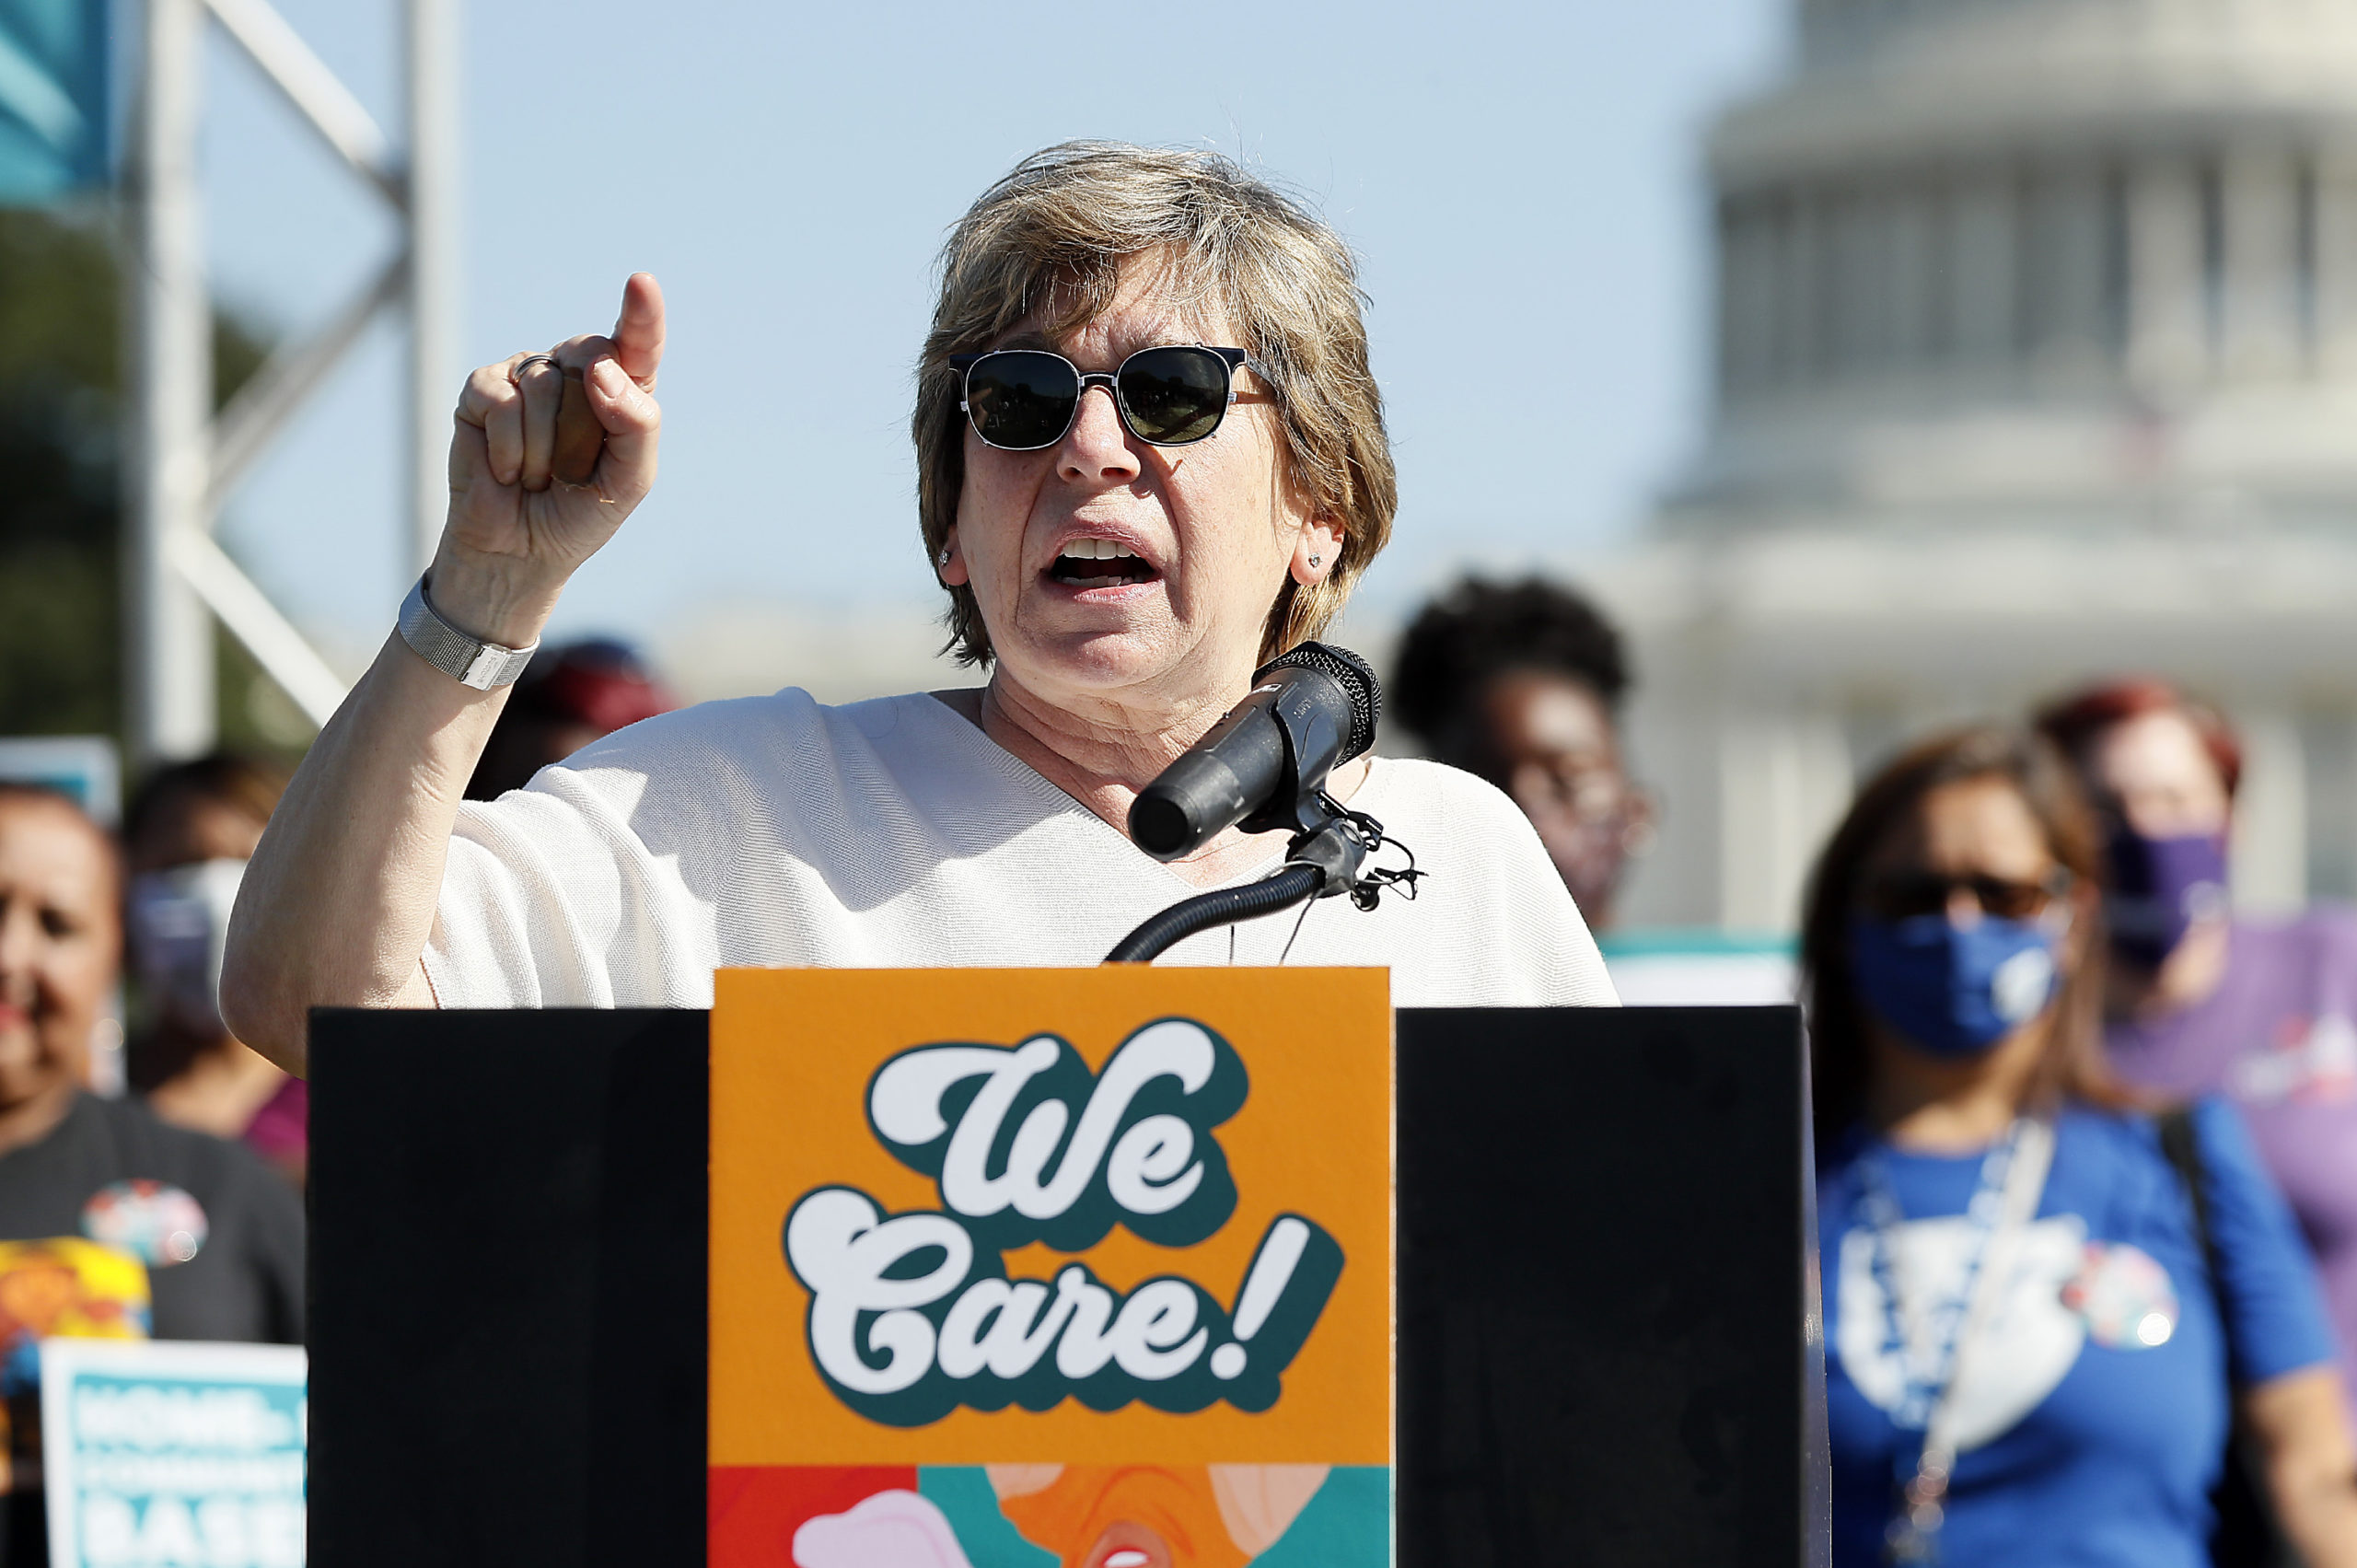 WASHINGTON, DC - OCTOBER 21: Randi Weingarten, president of the American Federation of Teachers, along with members of Congress, parents and caregiving advocates hold a press conference supporting Build Back Better investments in home care, childcare, paid leave and expanded CTC payments in front of the U.S. Capitol Building on October 21, 2021 in Washington, DC. (Photo by Paul Morigi/Getty Images for MomsRising Together)